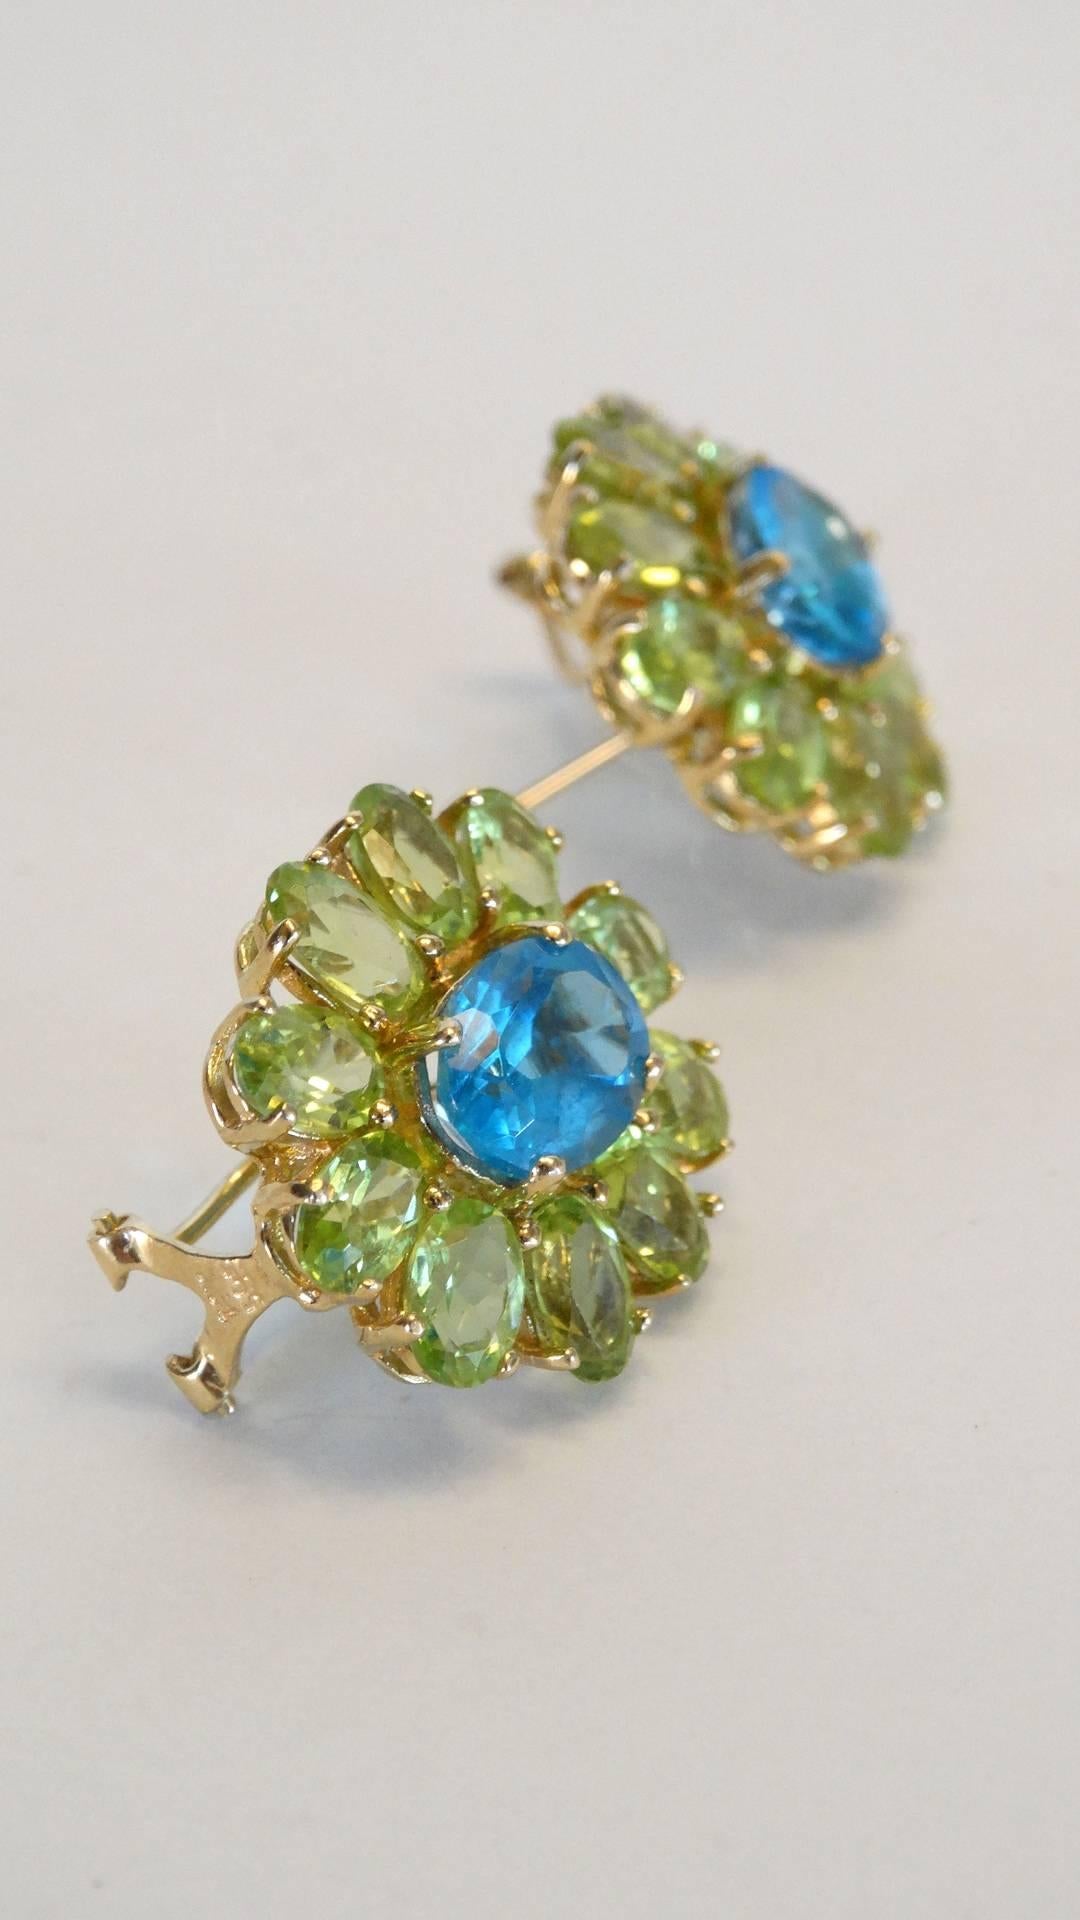 Stunning vintage flower earrings created with bright blue topaz and green peridot, set in 14kt yellow gold. A beautiful color combo signed 585 with a hallmark stamp of a heart. Designer unknown for pierced ears only 